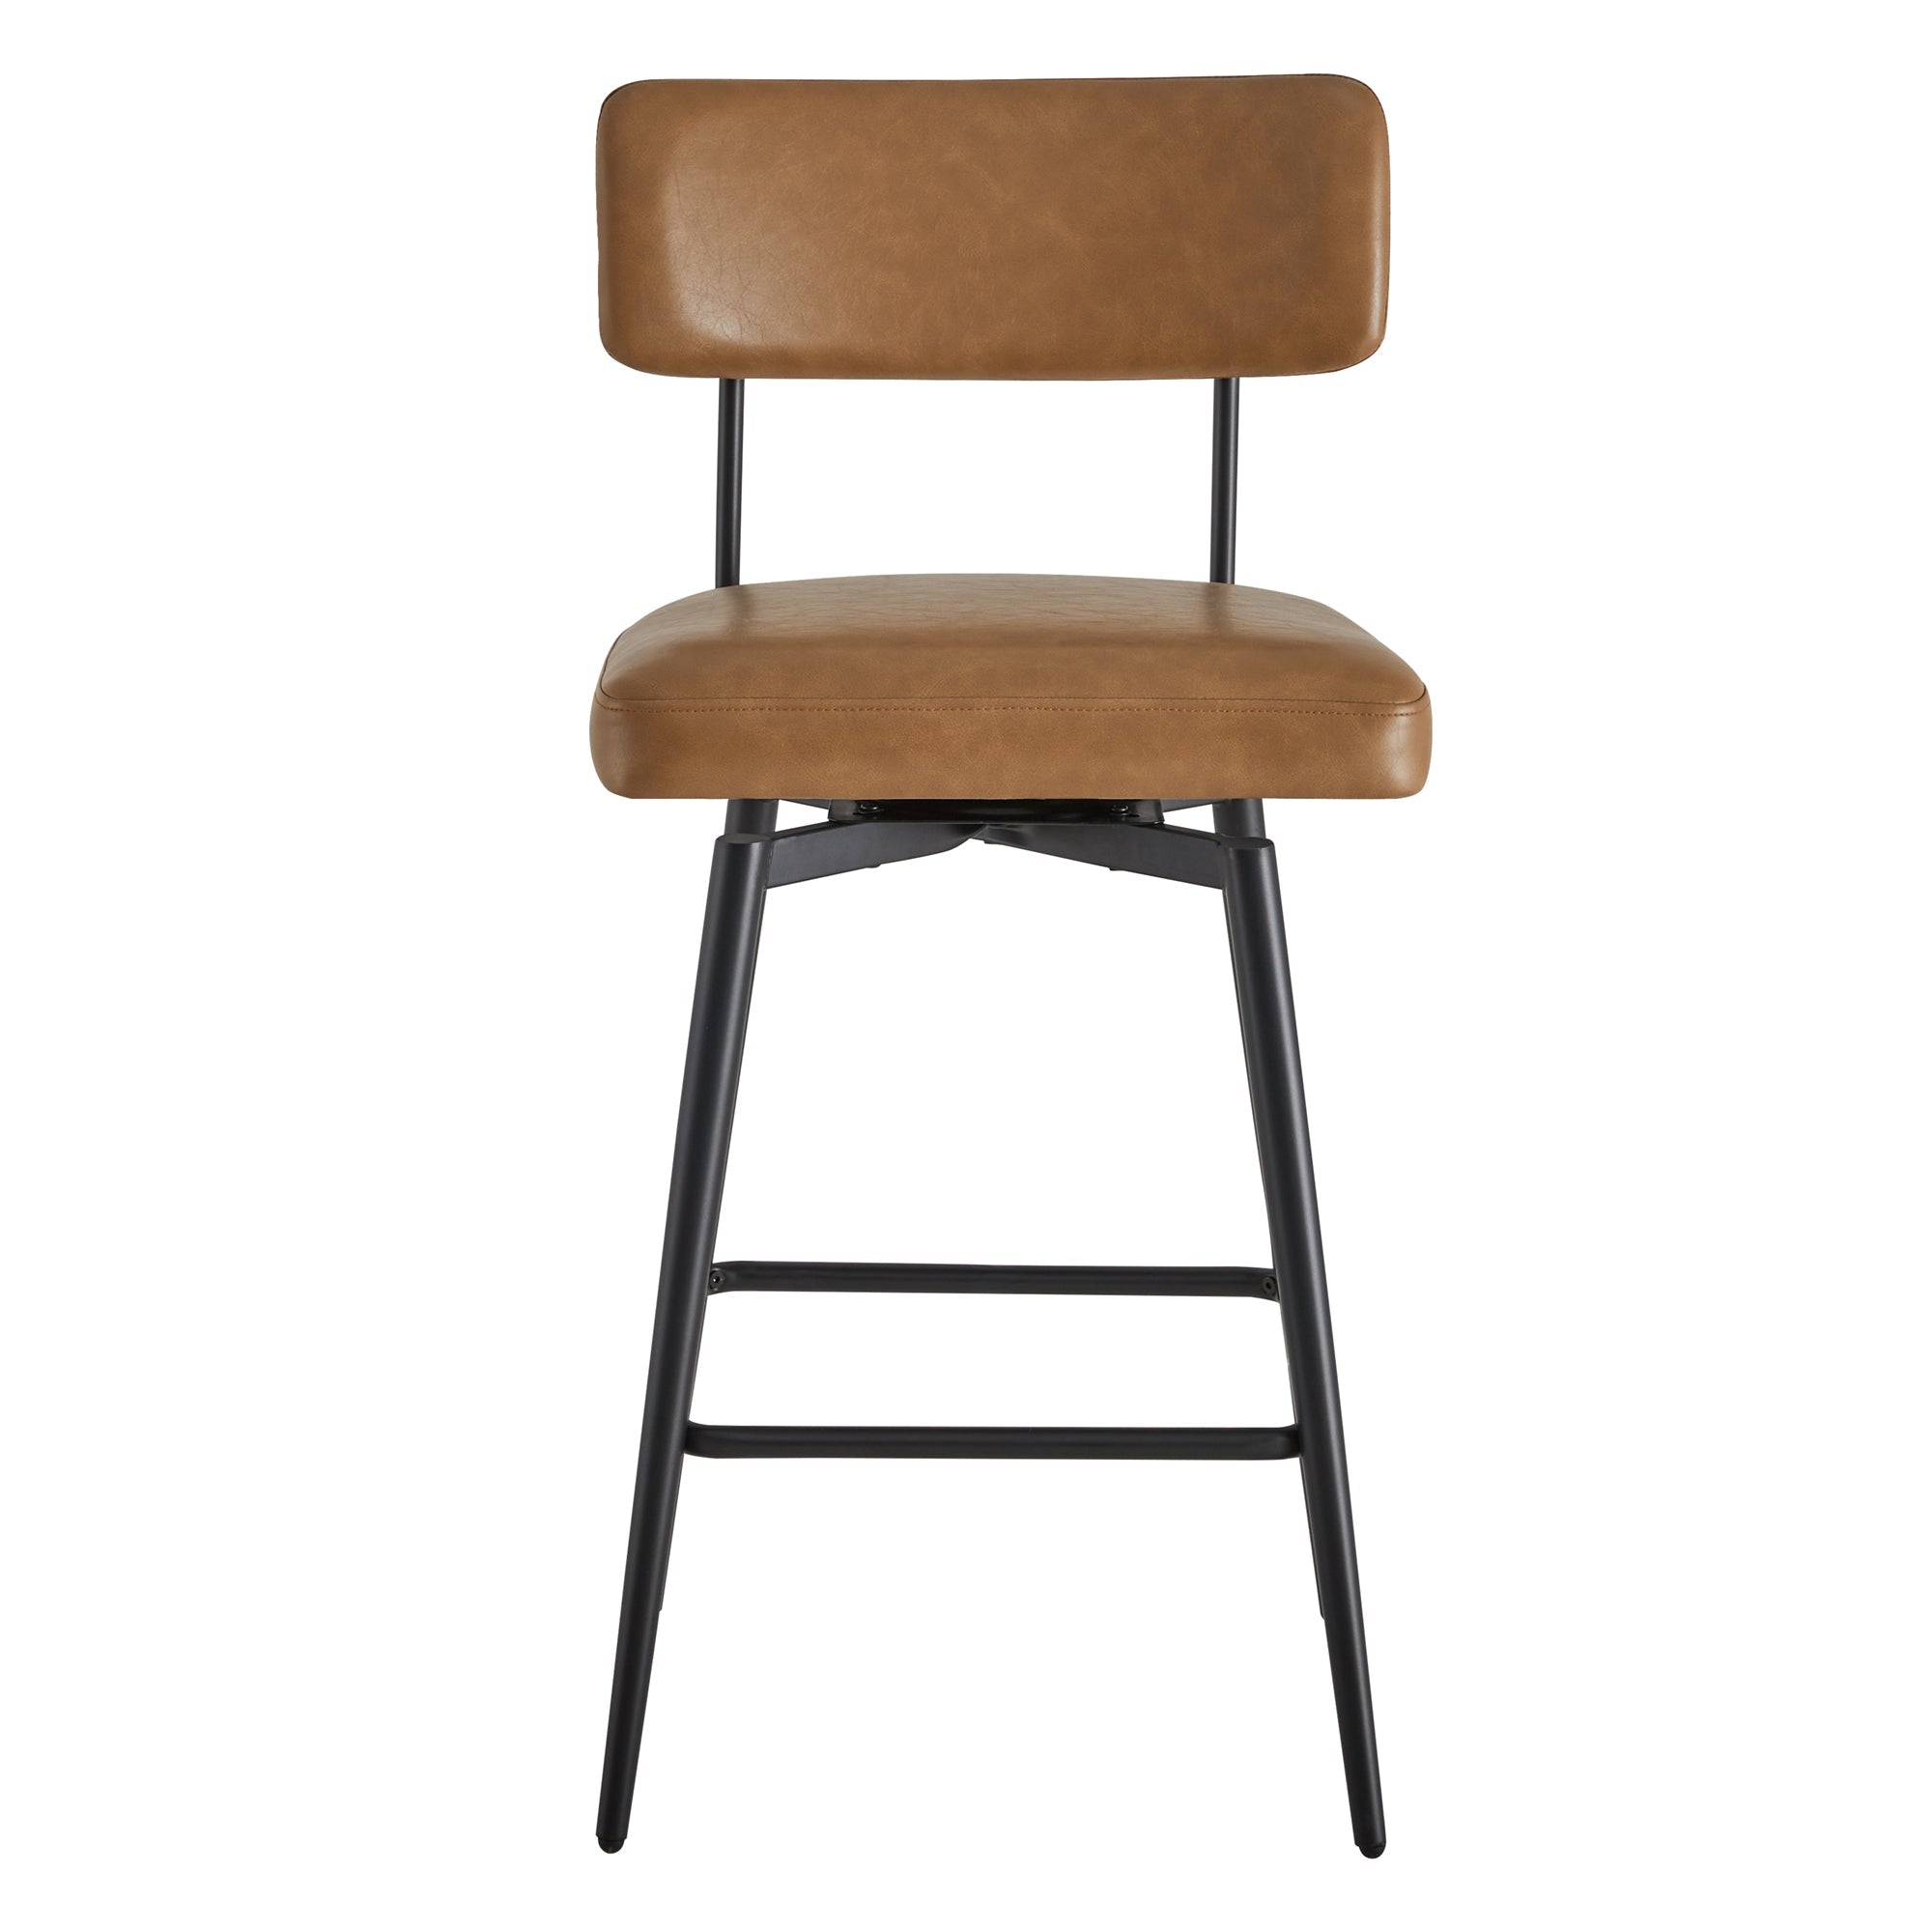 CHITA LIVING-Lovy Swivel Counter Stools (Set of 2）-Counter Stools-Faux Leather-Saddle Brown-